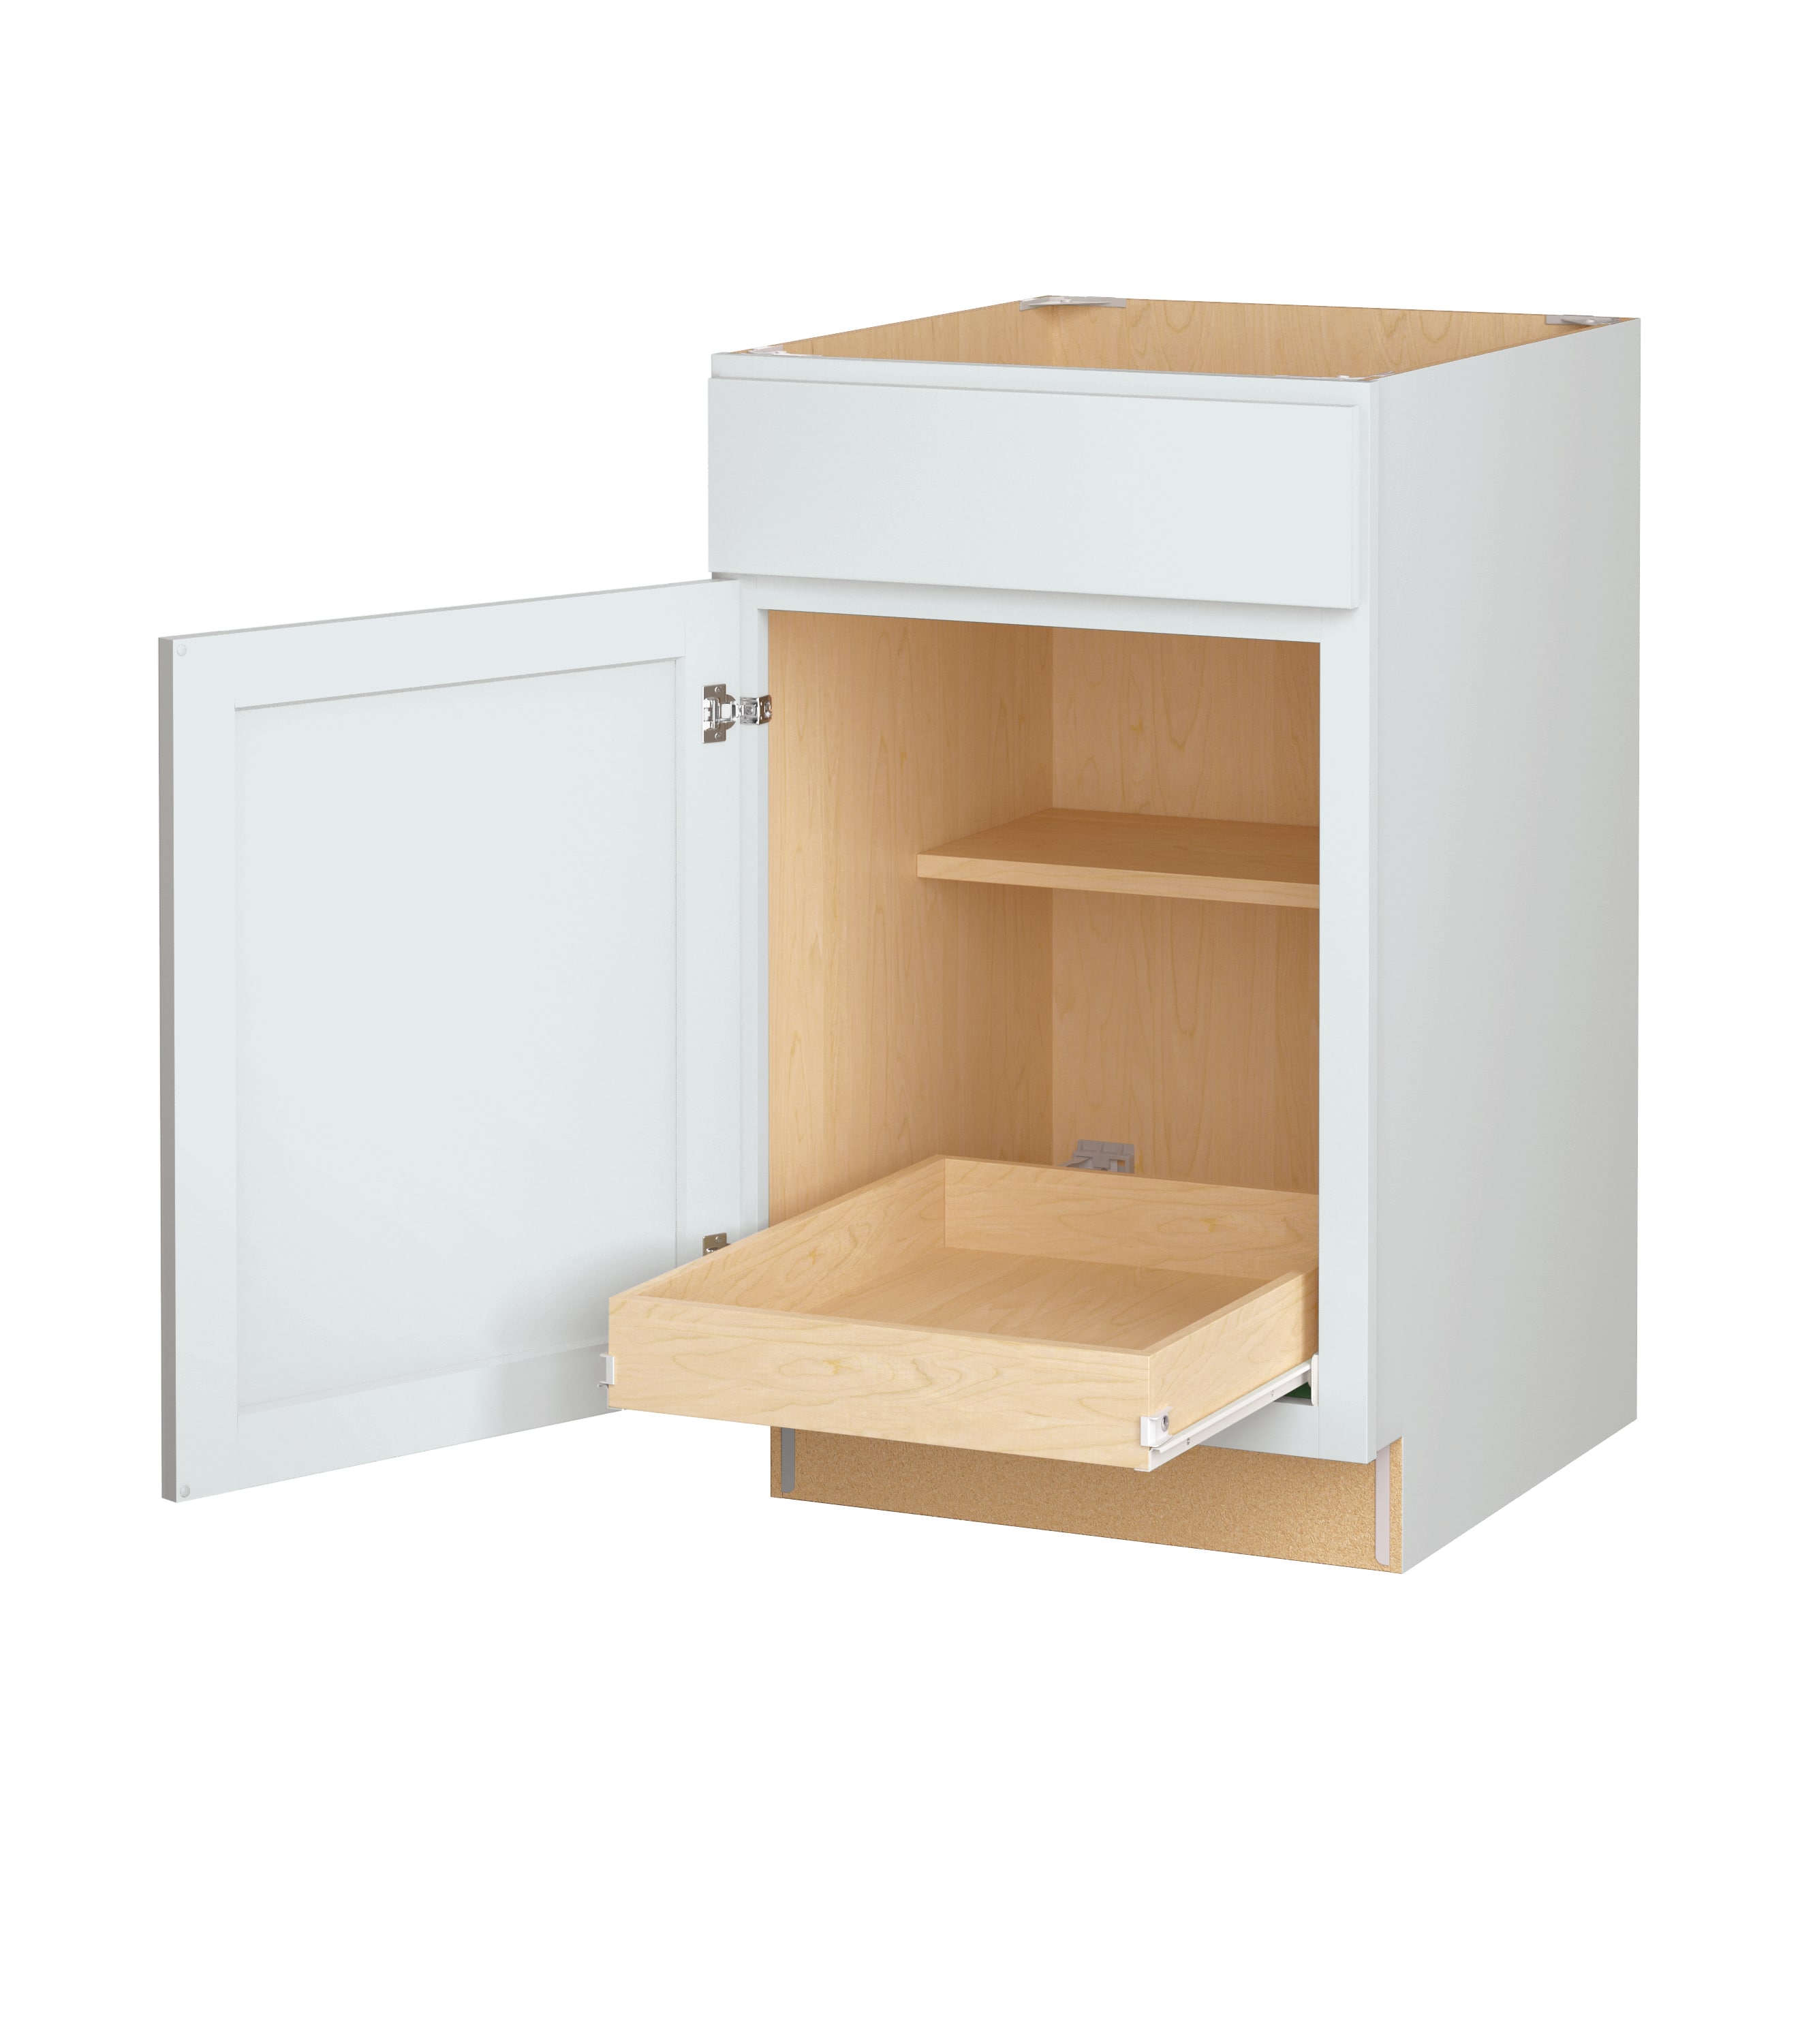 Diamond at Lowes - Organization - Base Tray Divider Pantry Pull-out